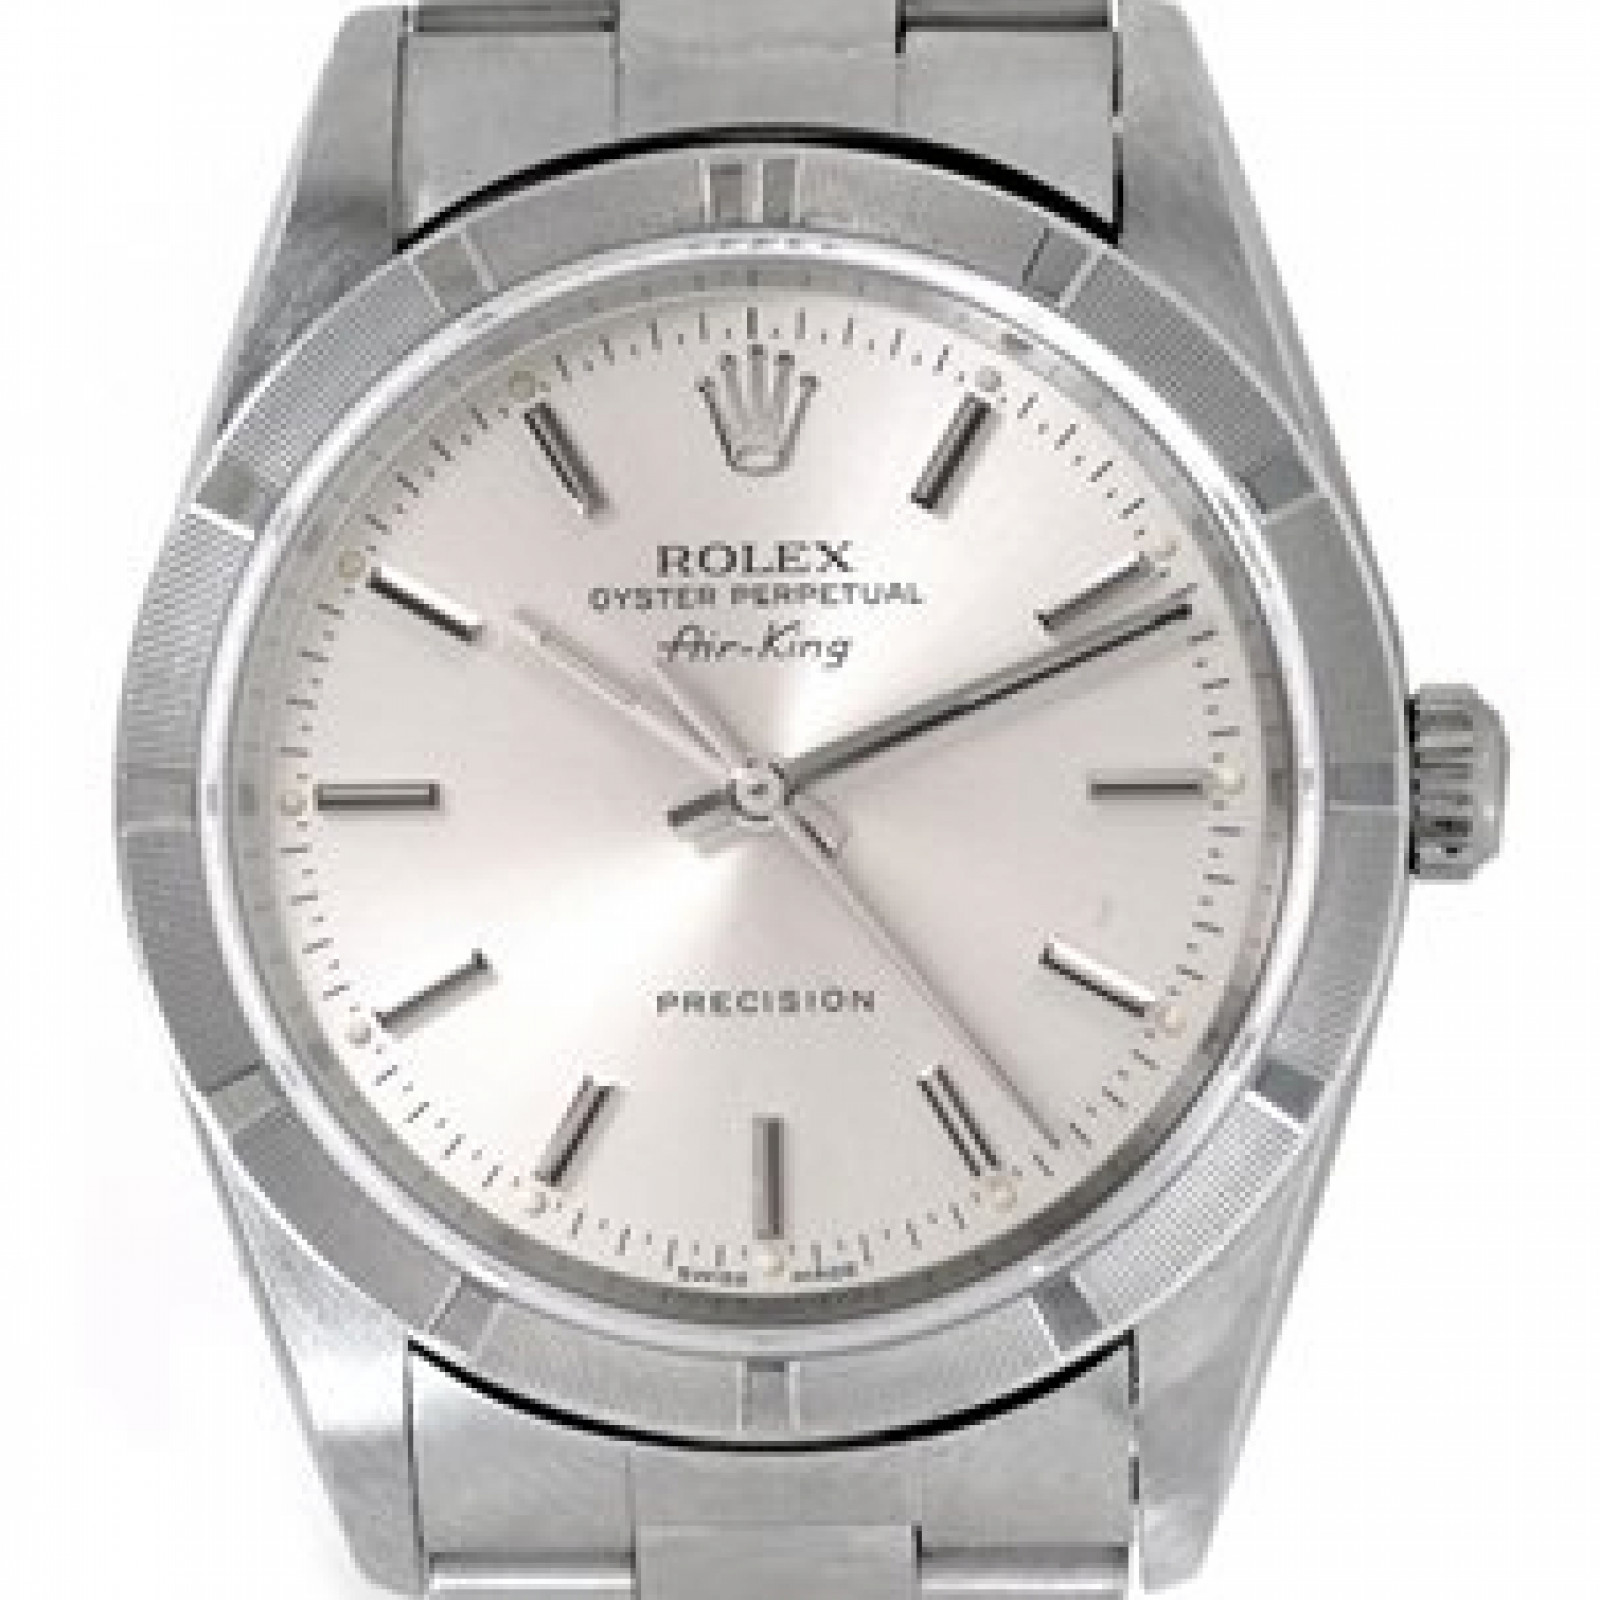 Pre-Owned Rolex Air King 14010 Steel Year 2006